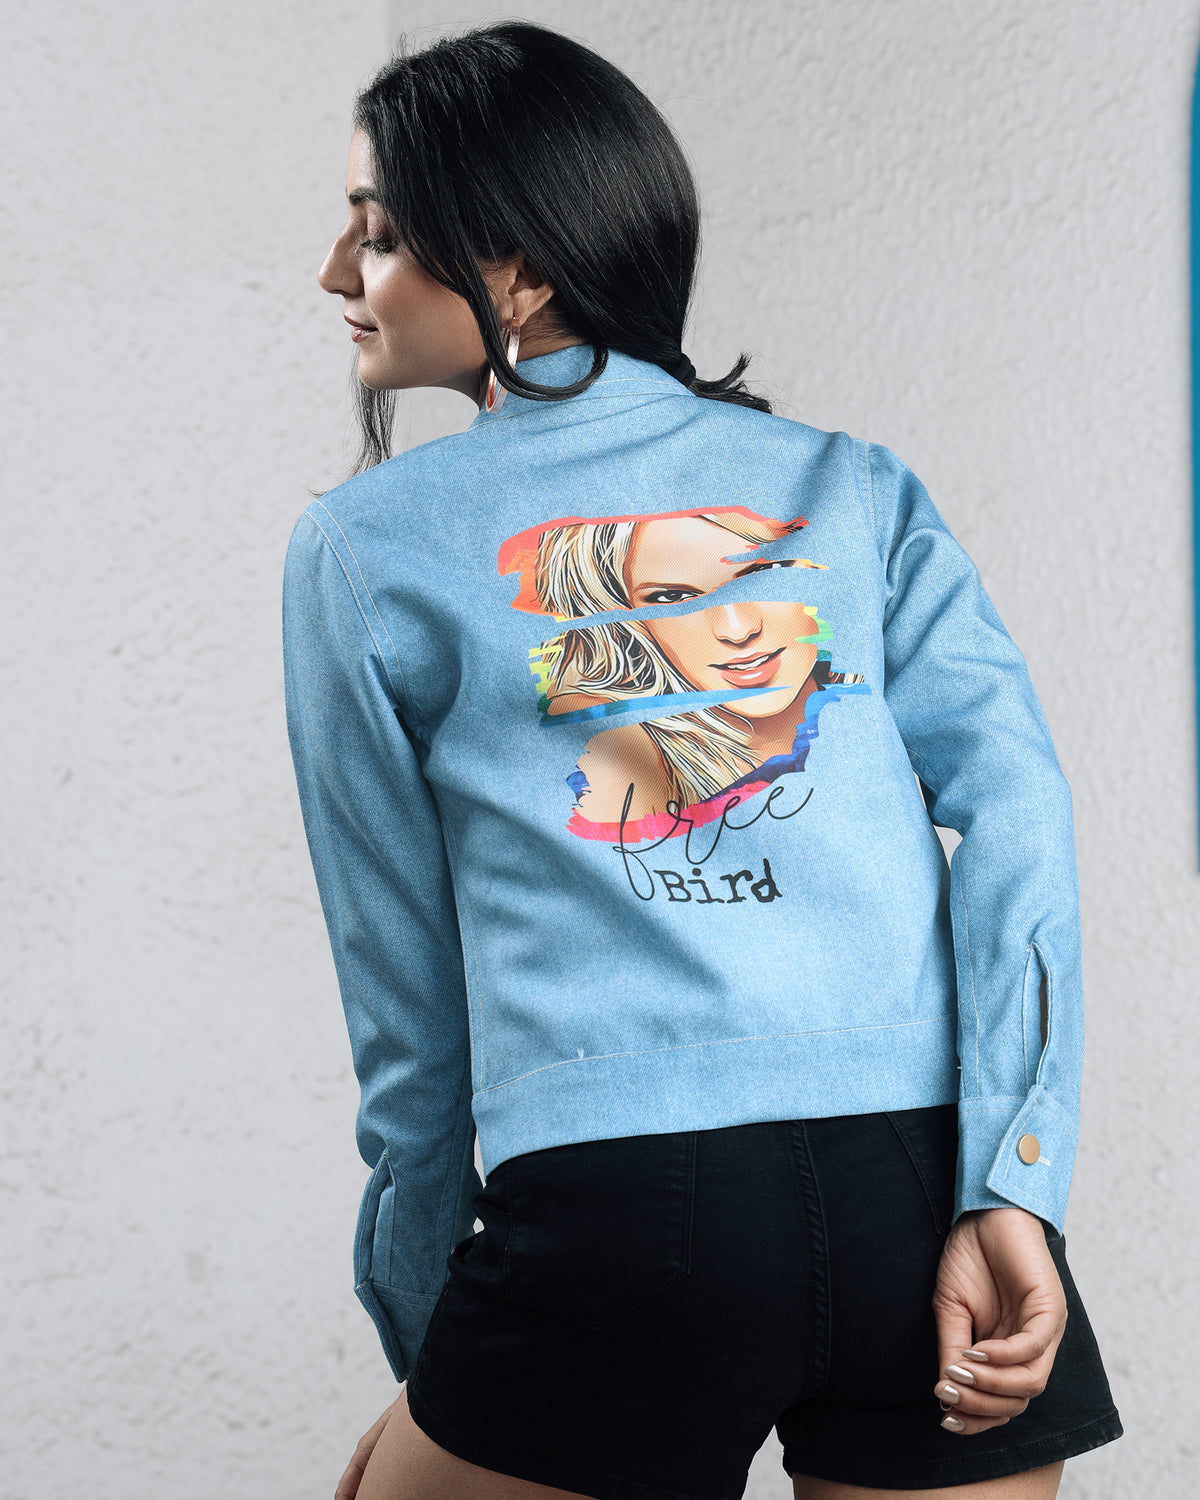 Quirky Queen Jacket: Classic Denim Touch Jacket